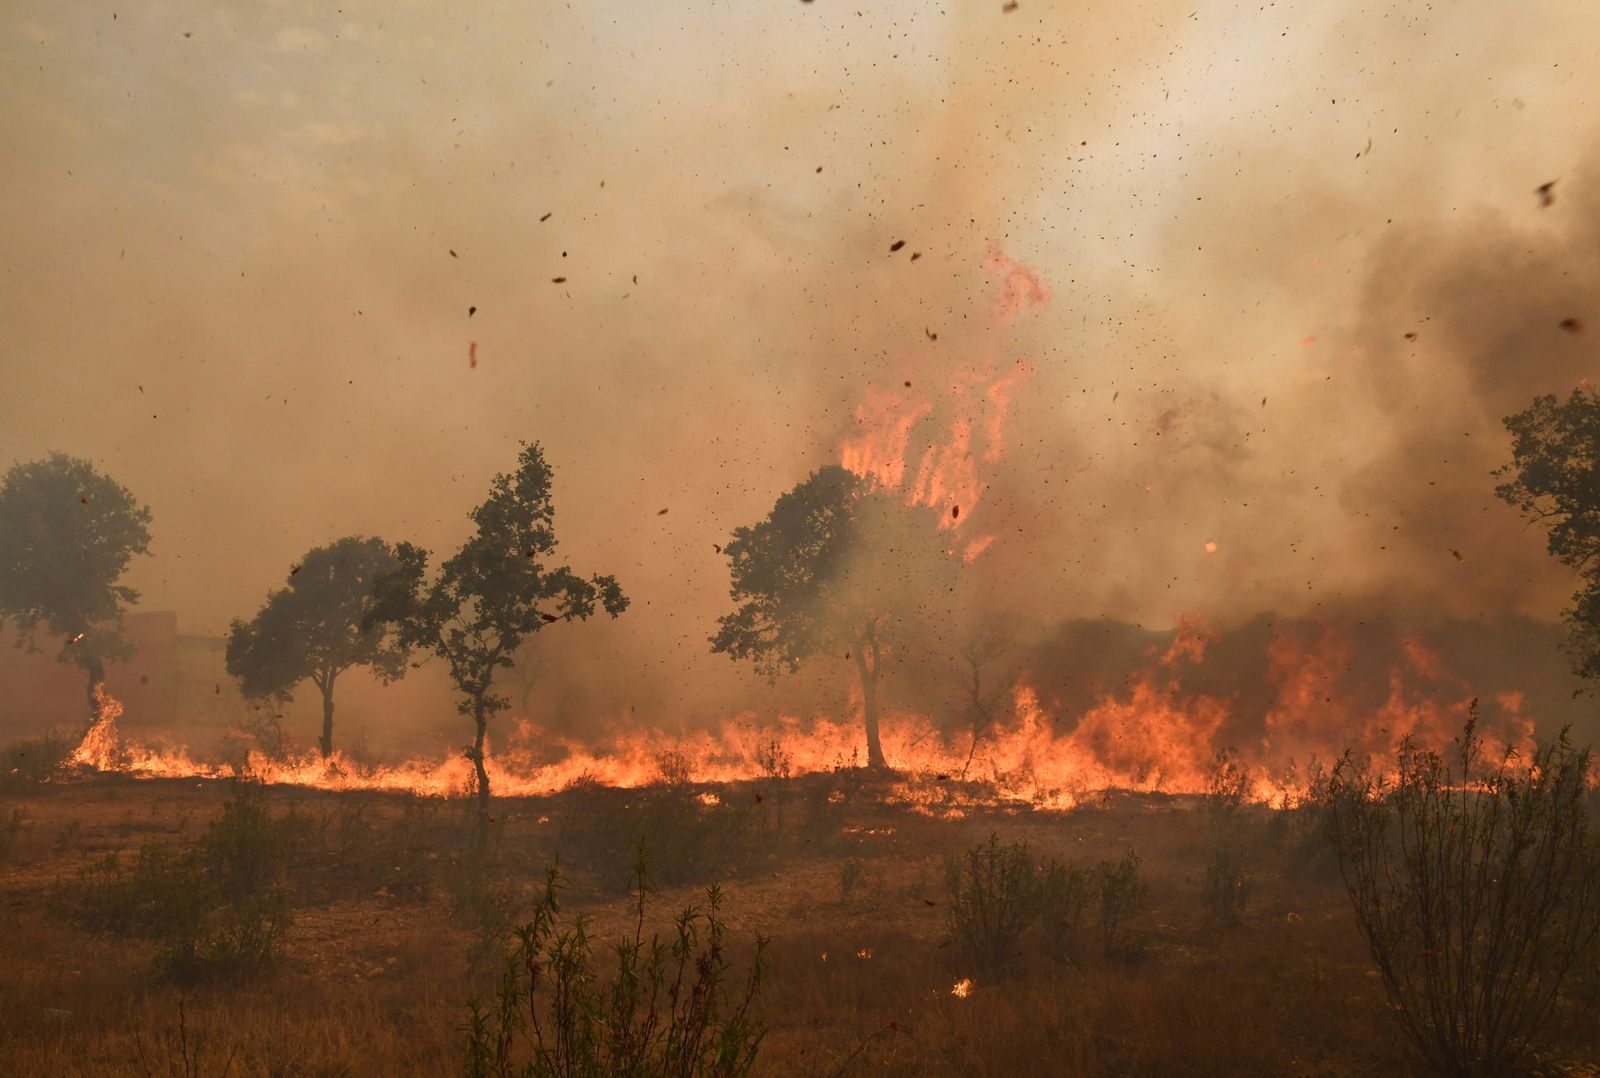 Flames rise from a forest near the village of Pumarejo, northern Spain, on July 18, 2022. - Emergency services battled several wildfires as Spain remained in the grip of an exceptional heatwave that has seen temperatures reach 43 degrees Celsius (109 degrees Farenheit). (Photo by MIGUEL RIOPA / AFP) - AFP